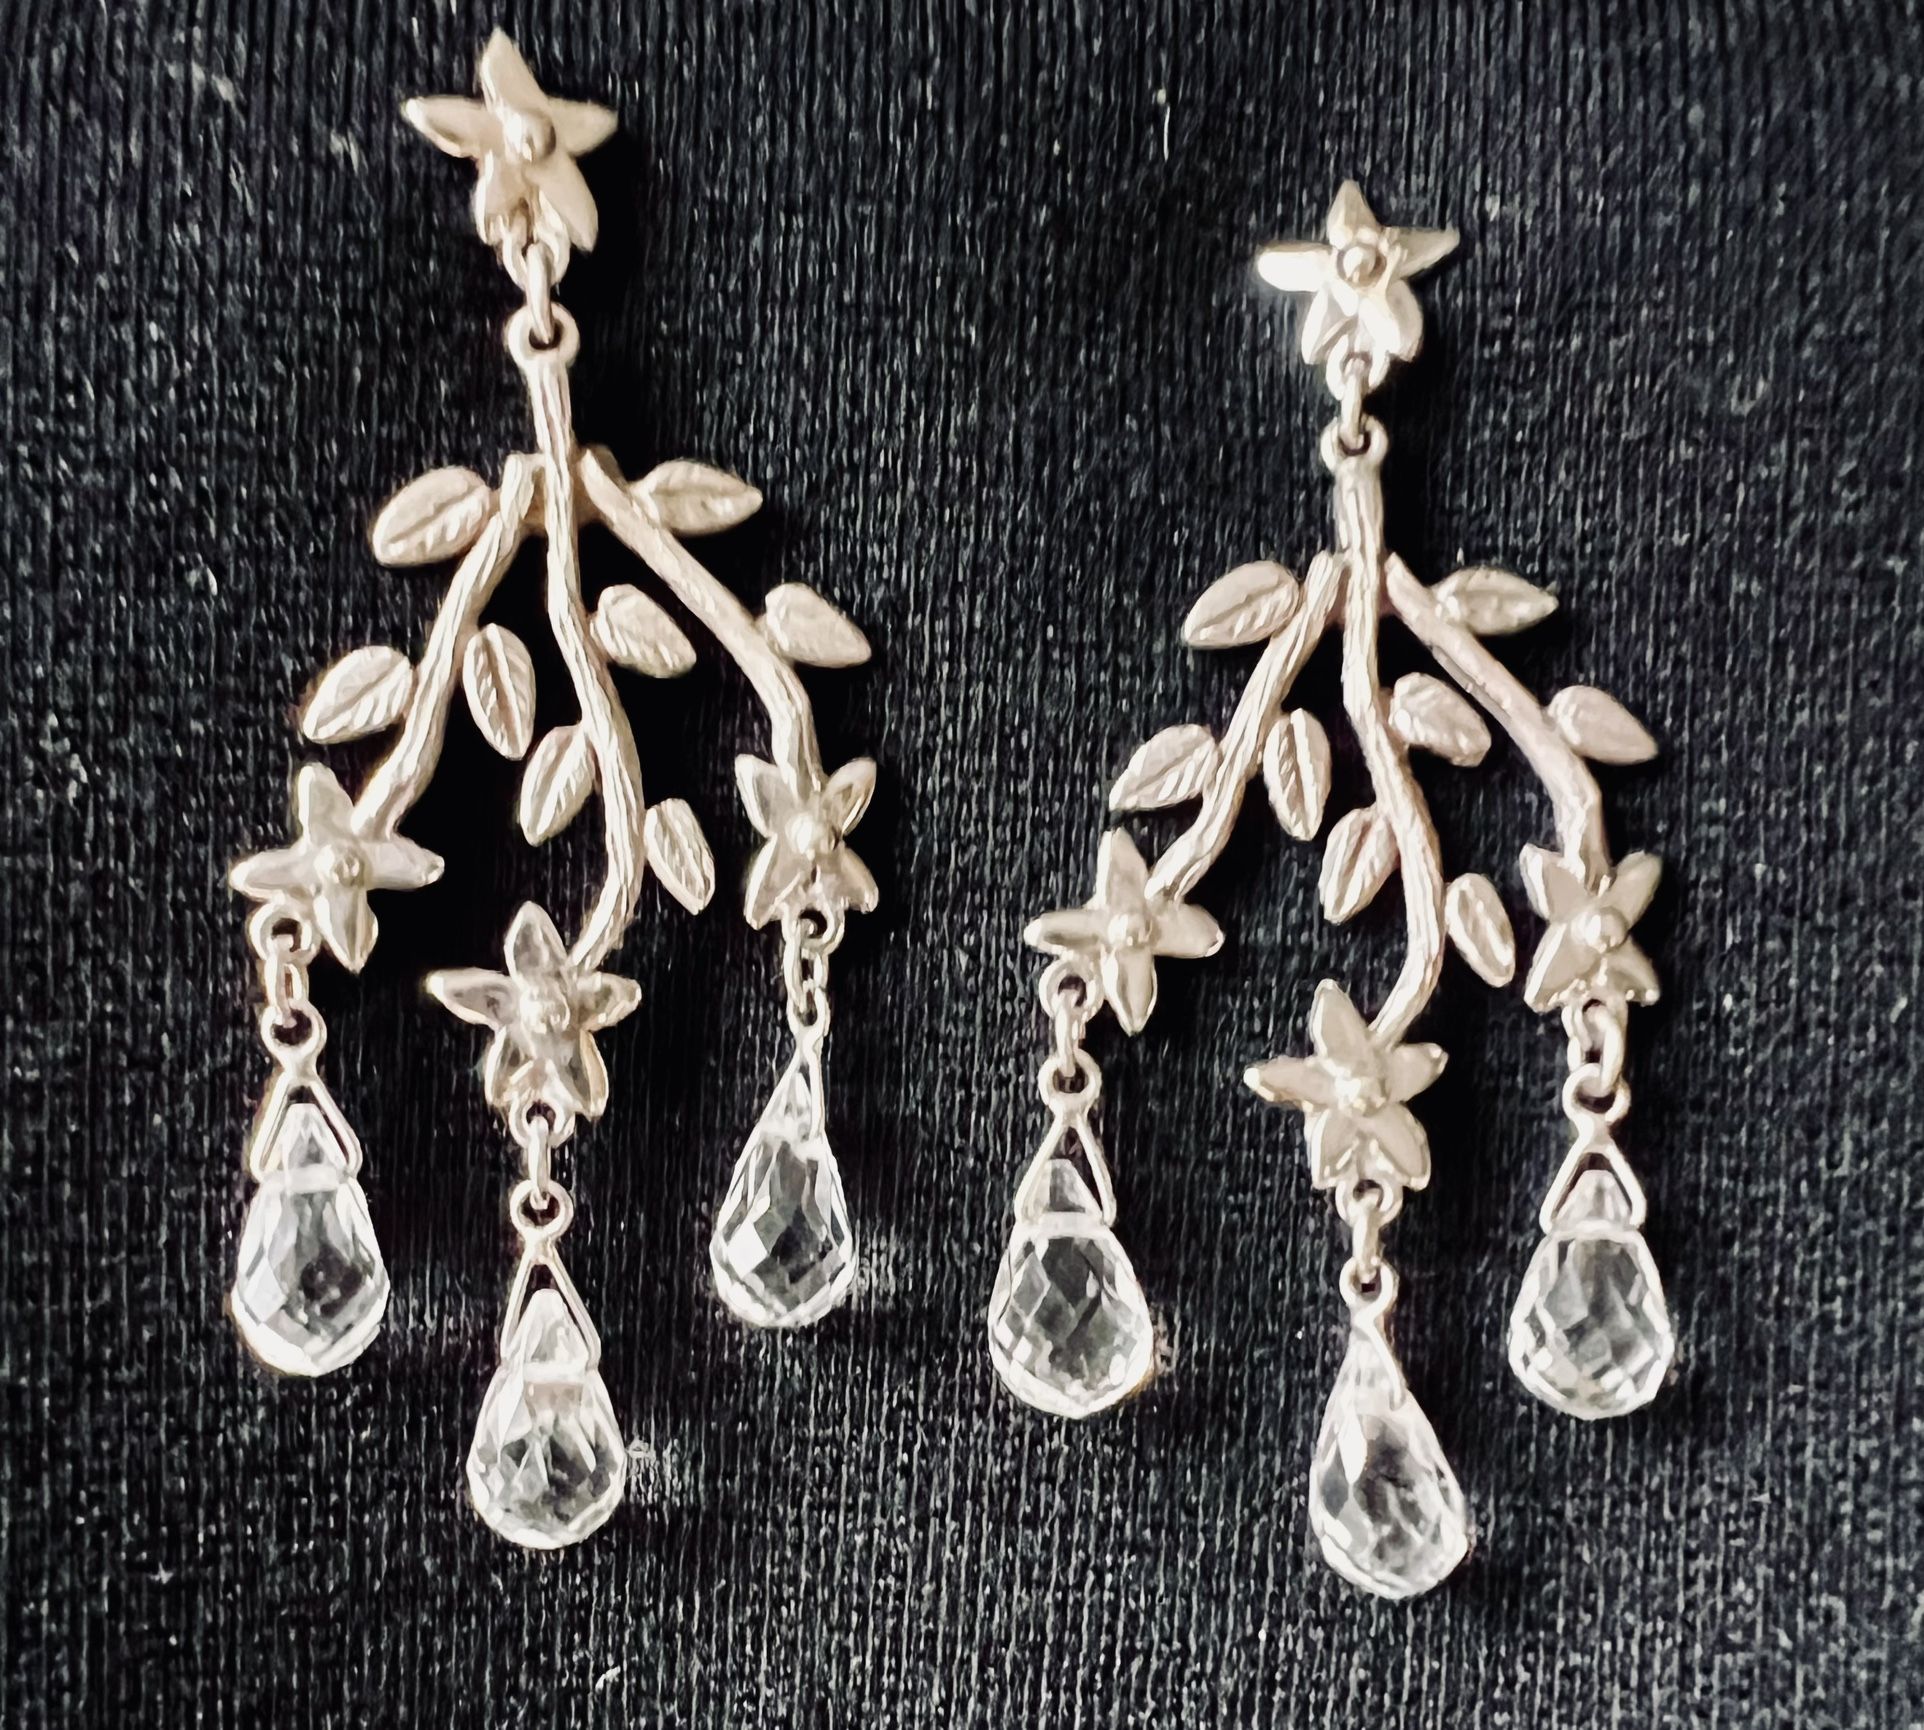 14K SOLID WHITE GOLD (not Gold Plated)  Victoria Cunningham Jewelry Earrings 